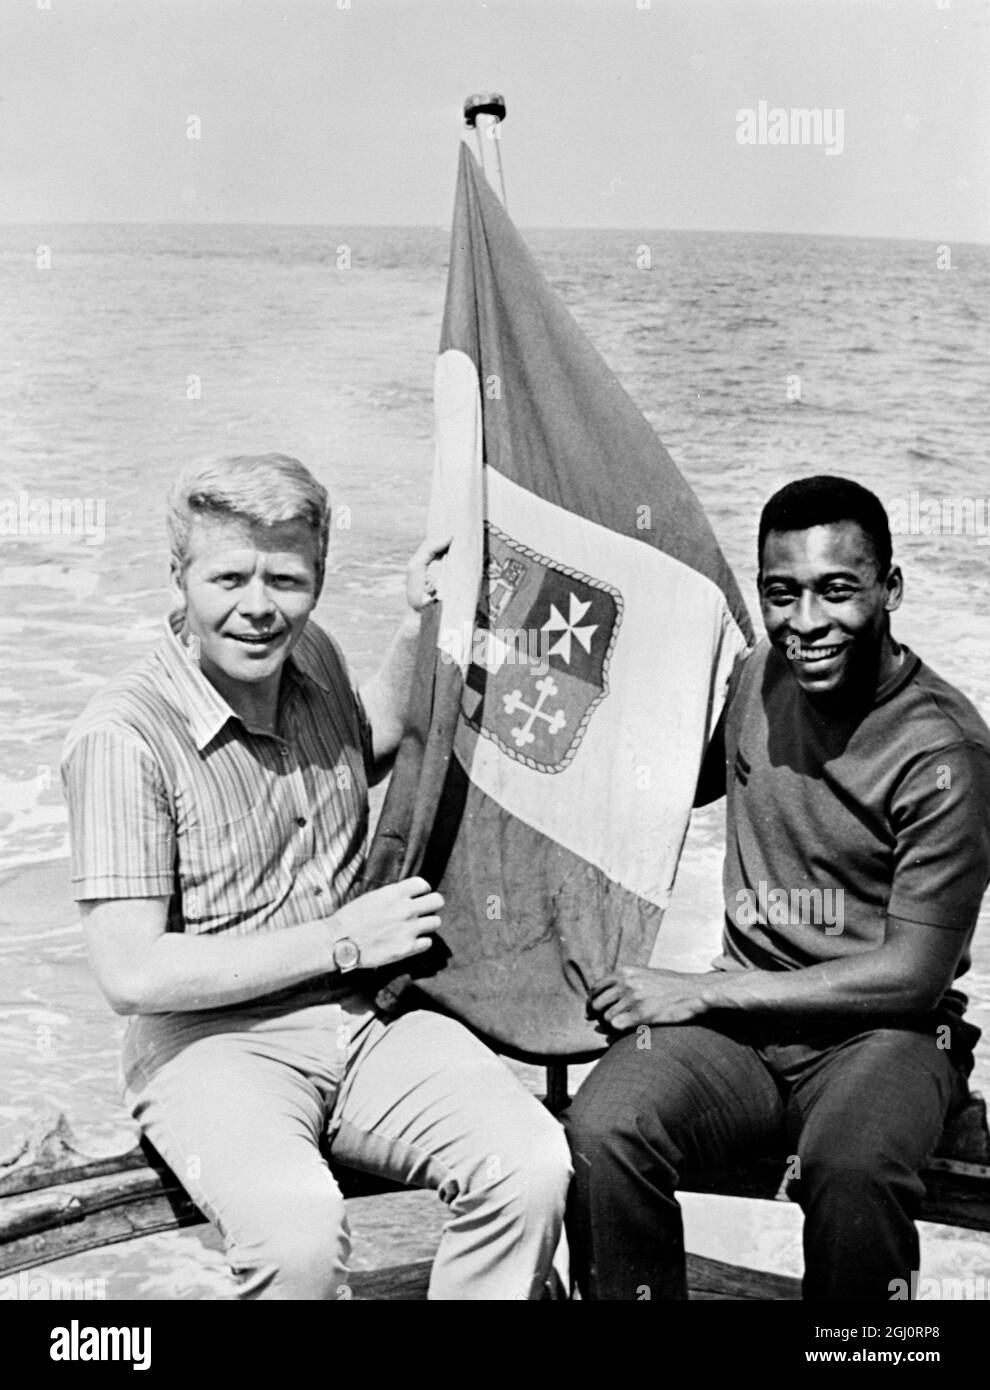 Two of the world's leading footballers, Germany's Helmud Haller and Pele from Brazil. Relaxing on a yacht hired by Haller who plays for the Bologna team in Italy. Riccione, Italy - 20 July 1967 Stock Photo